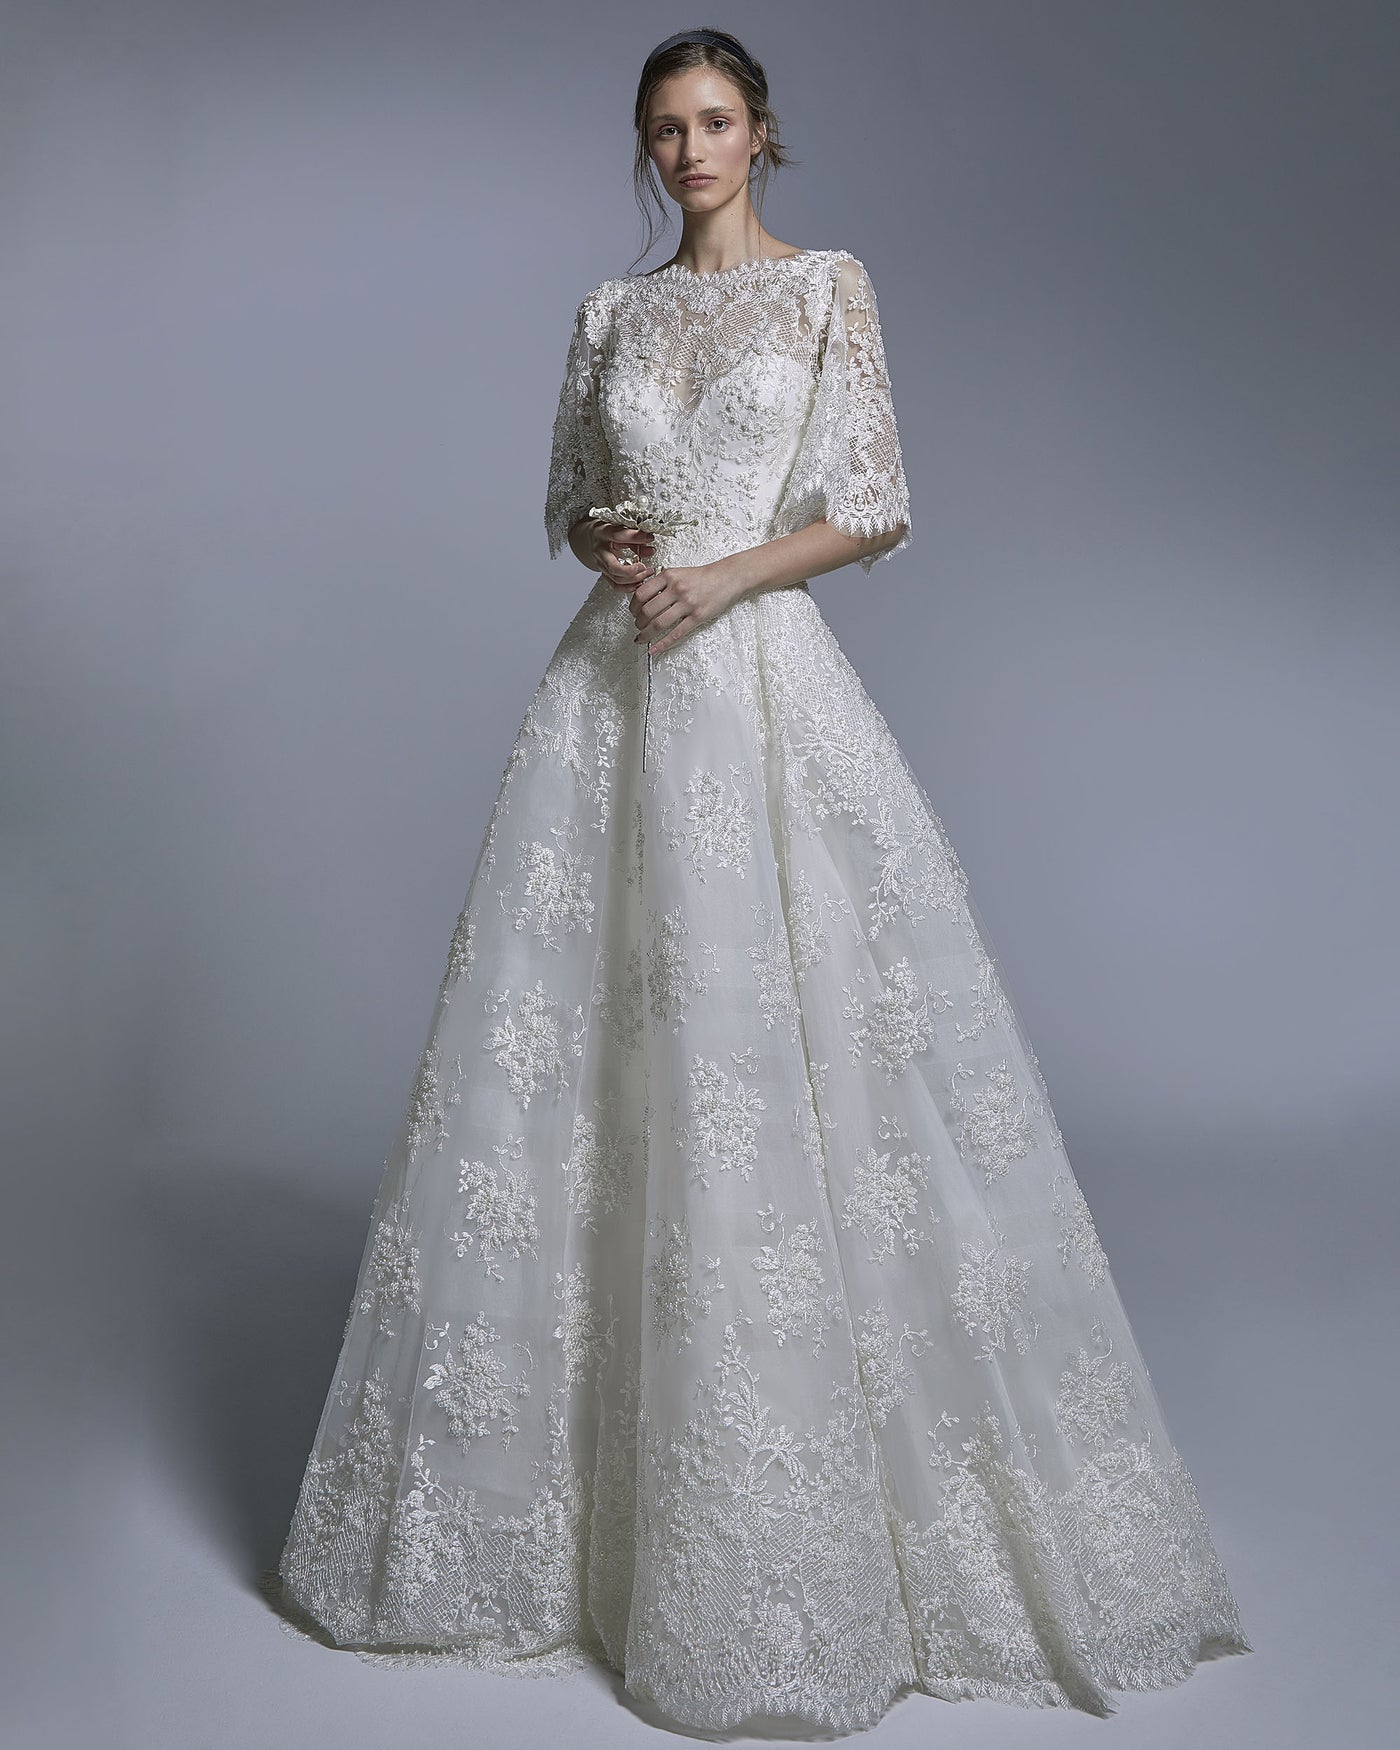 Boat Neckline With Wide Flared 3/4 Sleeves Gown